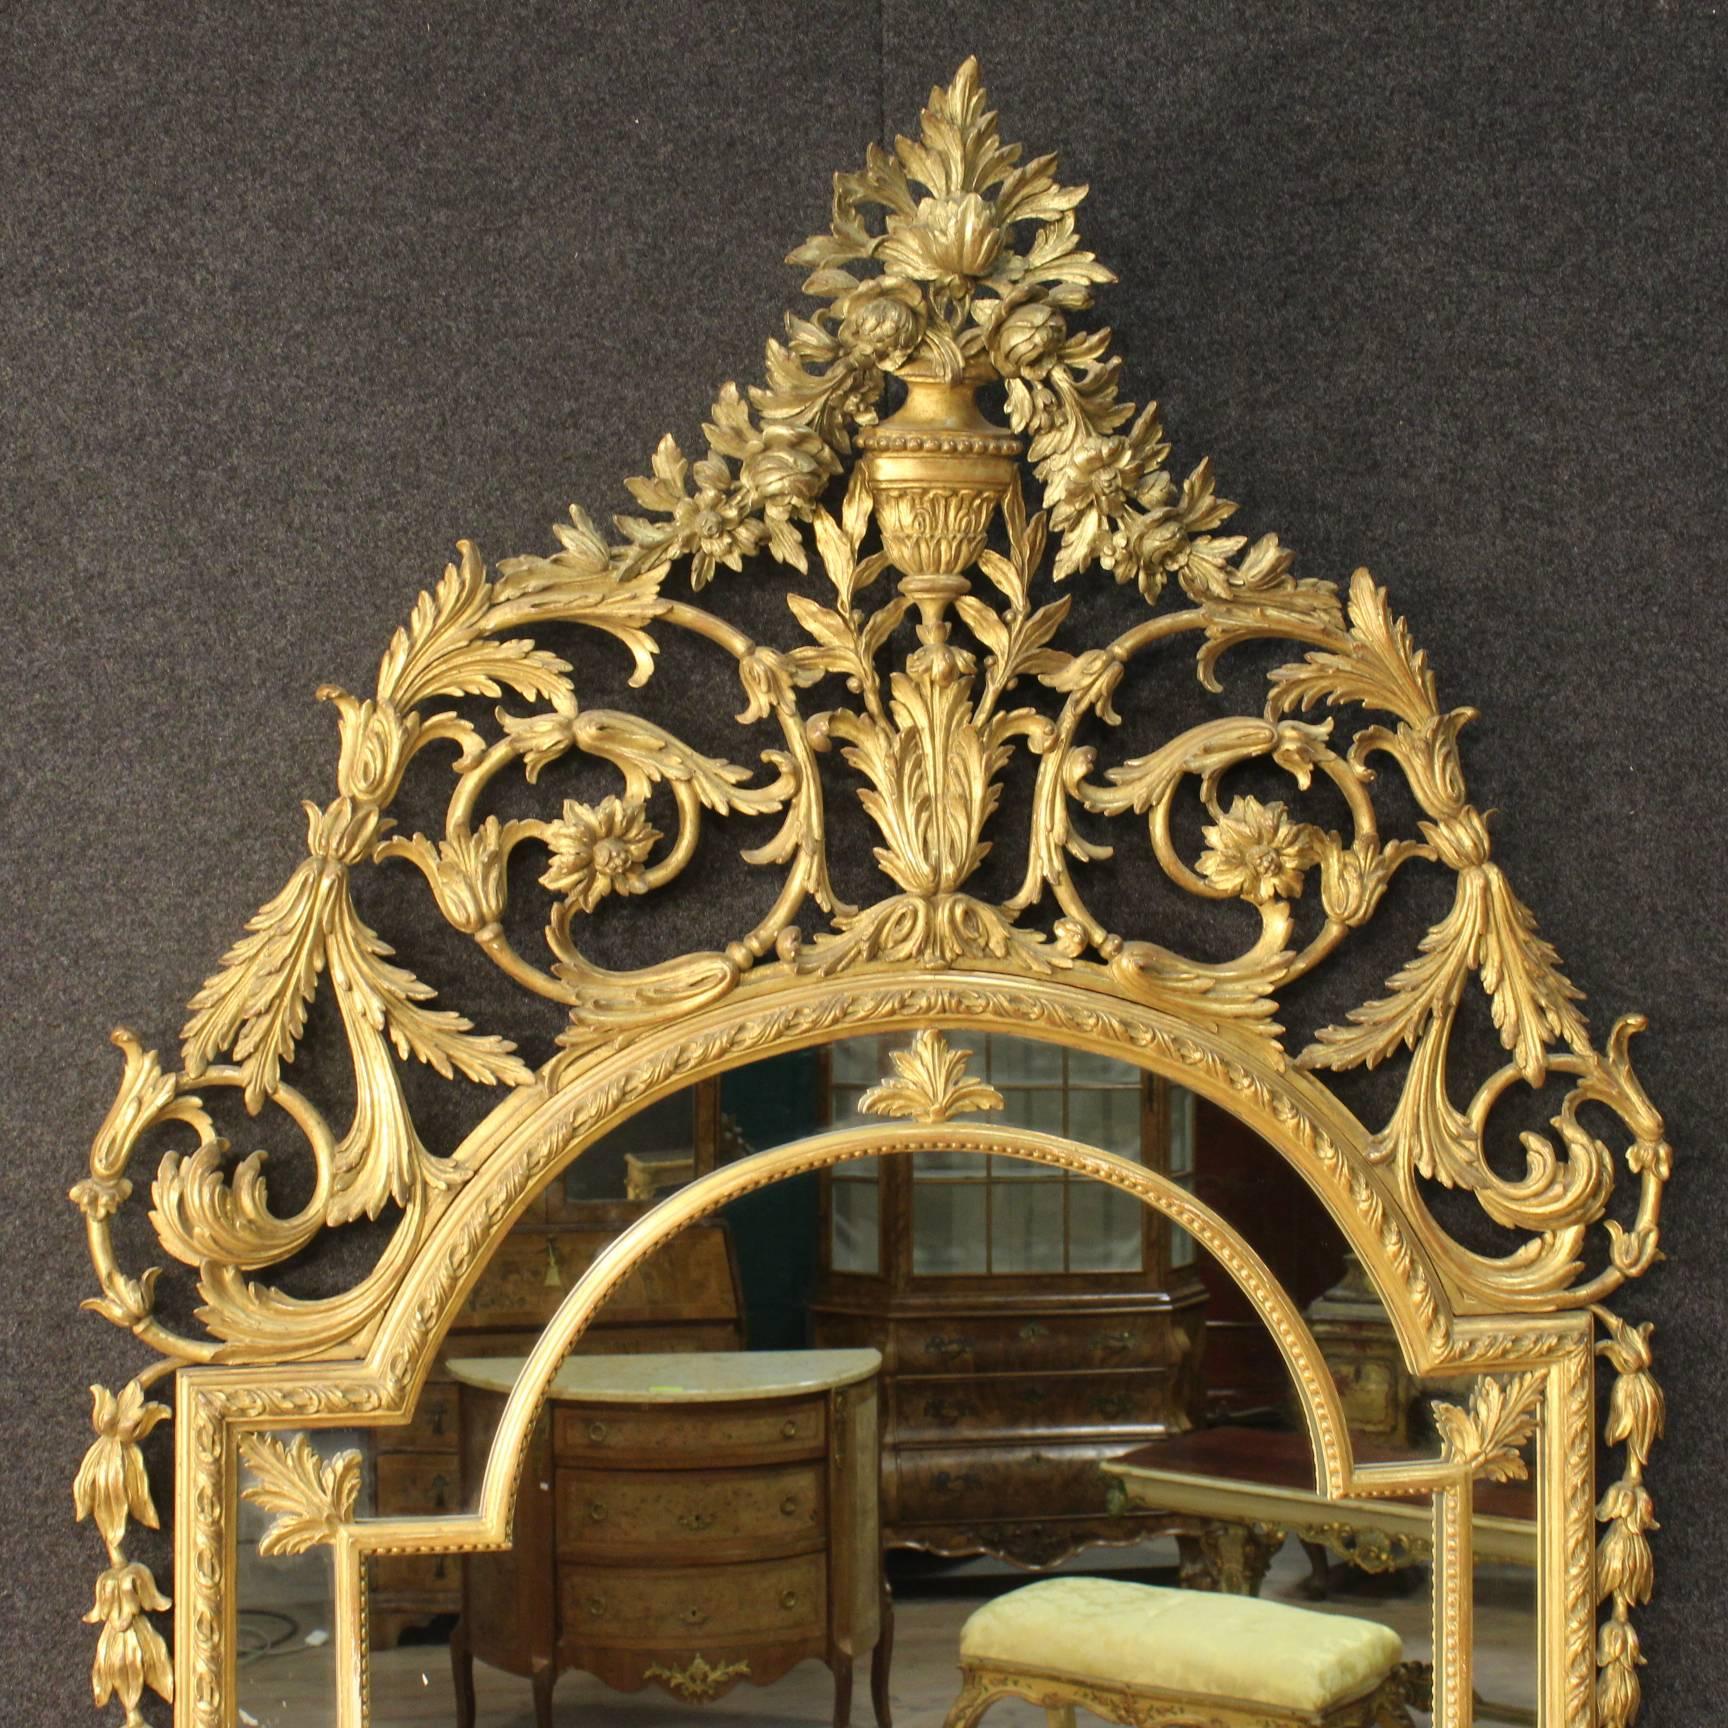 Big Italian mirror of the 20th century. Furniture of beautiful line and good taste in Louis XVI style, made by richly carved and gilded wood. Mirror of great impact pleasantly adorned with floral decorations. Furniture ideal to be placed into a